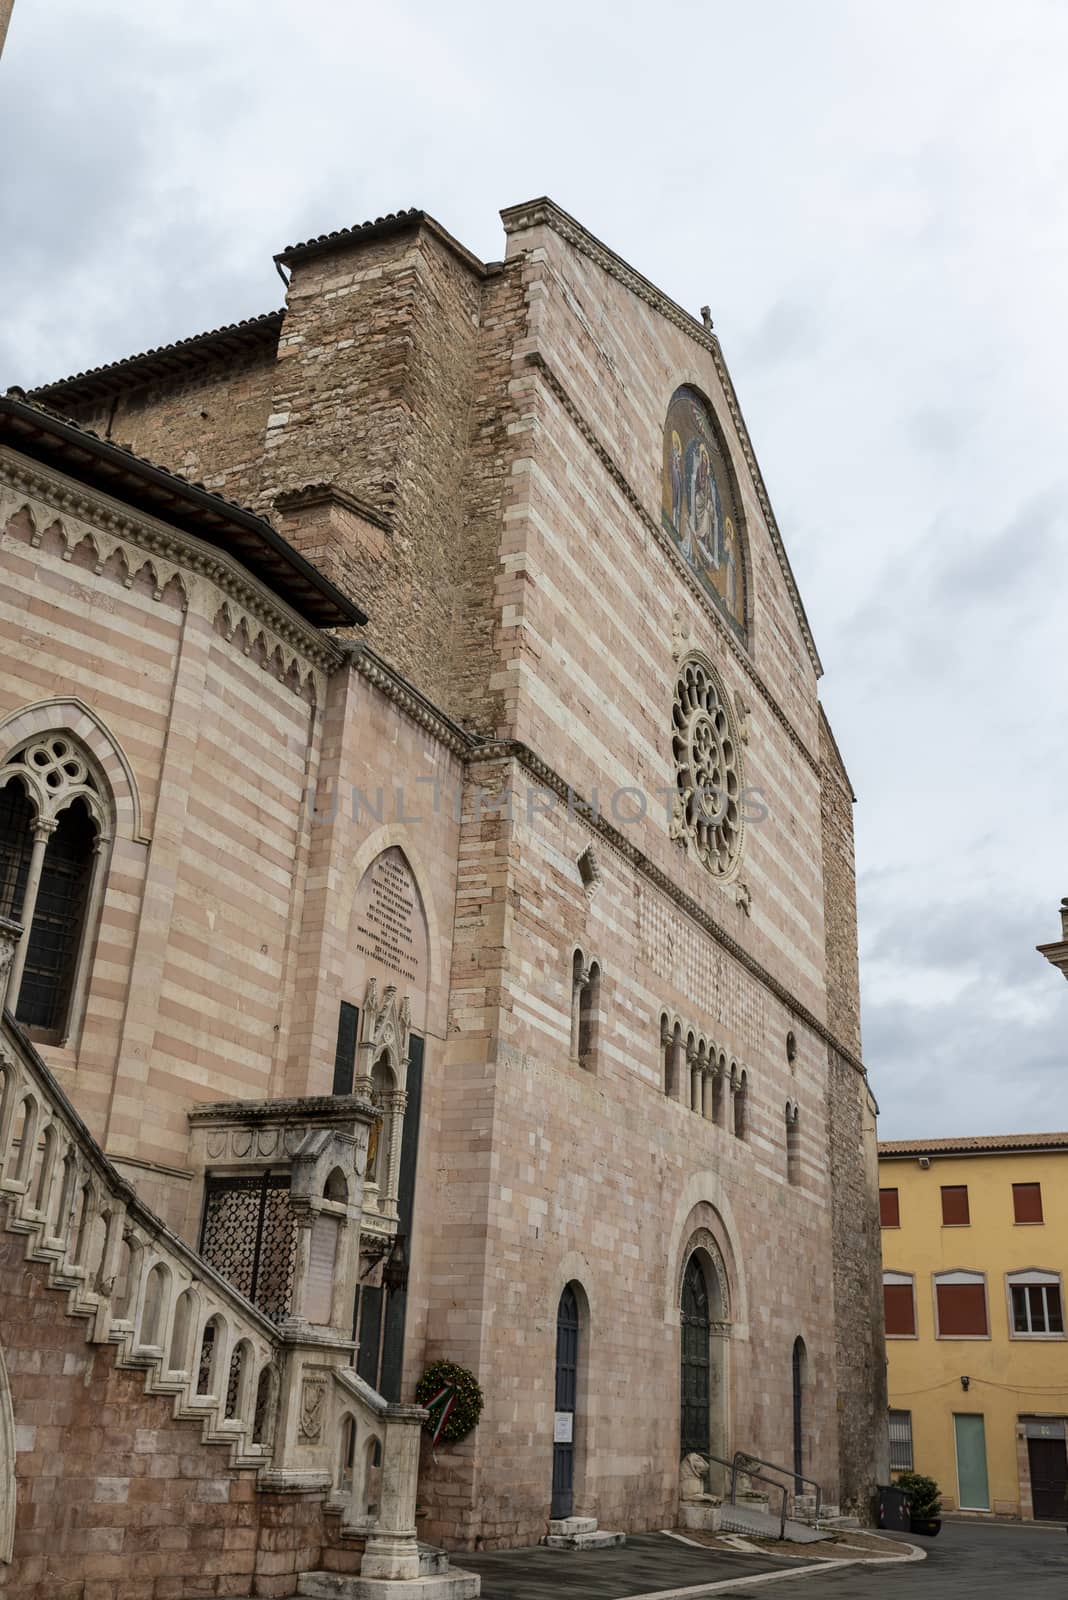 foligno.italy june 14 2020 :main church of foligno san feliciano large structure with bell tower and dome